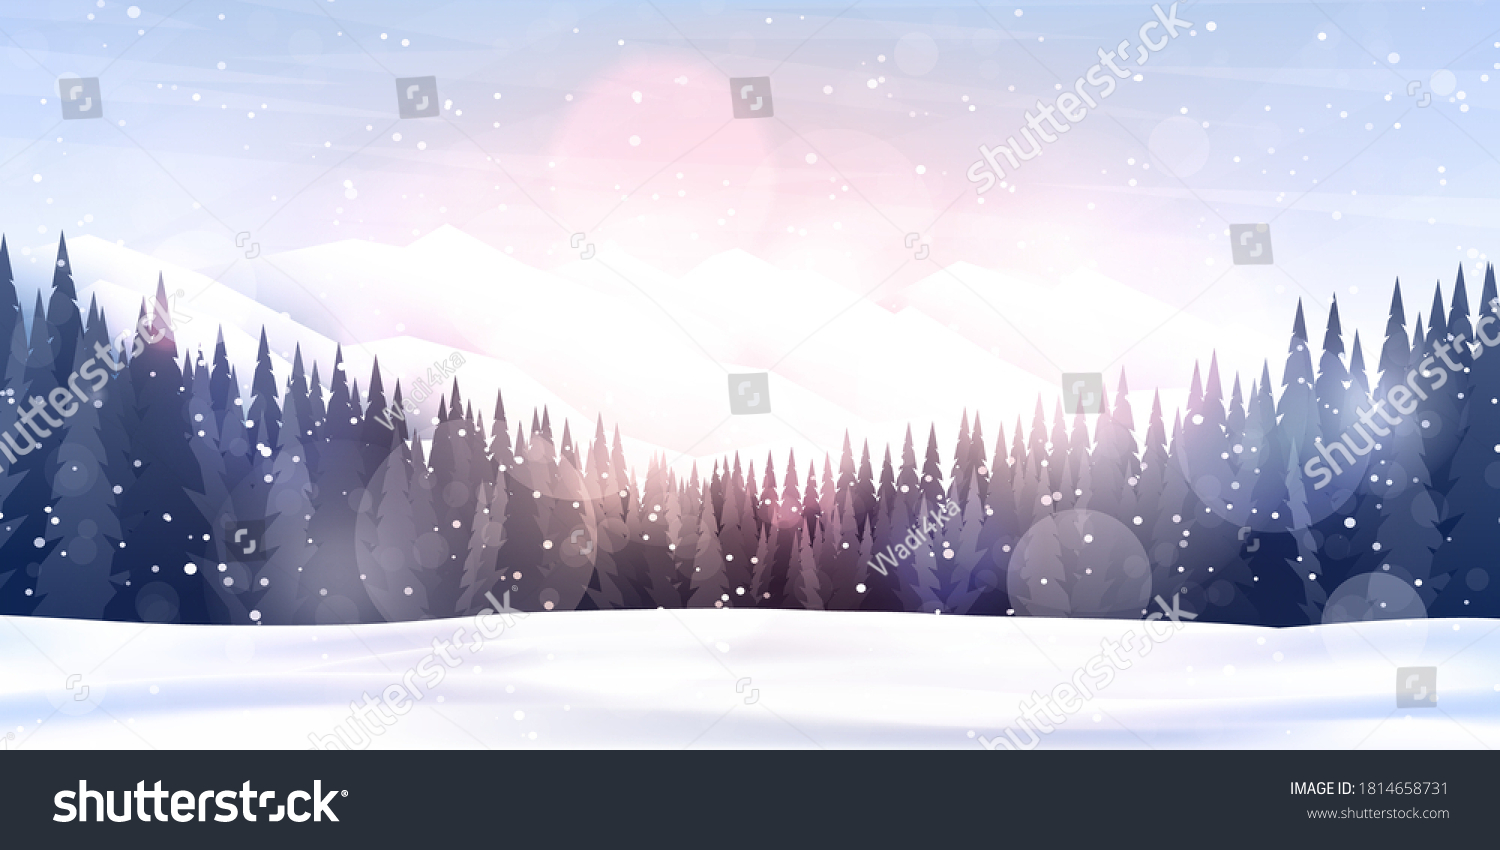 Vector illustration. Flat landscape. Snowy background. Snowdrifts. Snowfall. Clear blue sky. Blizzard. Cartoon wallpaper. Winter season. Forest trees and mountains. Design for website, poster, banner #1814658731